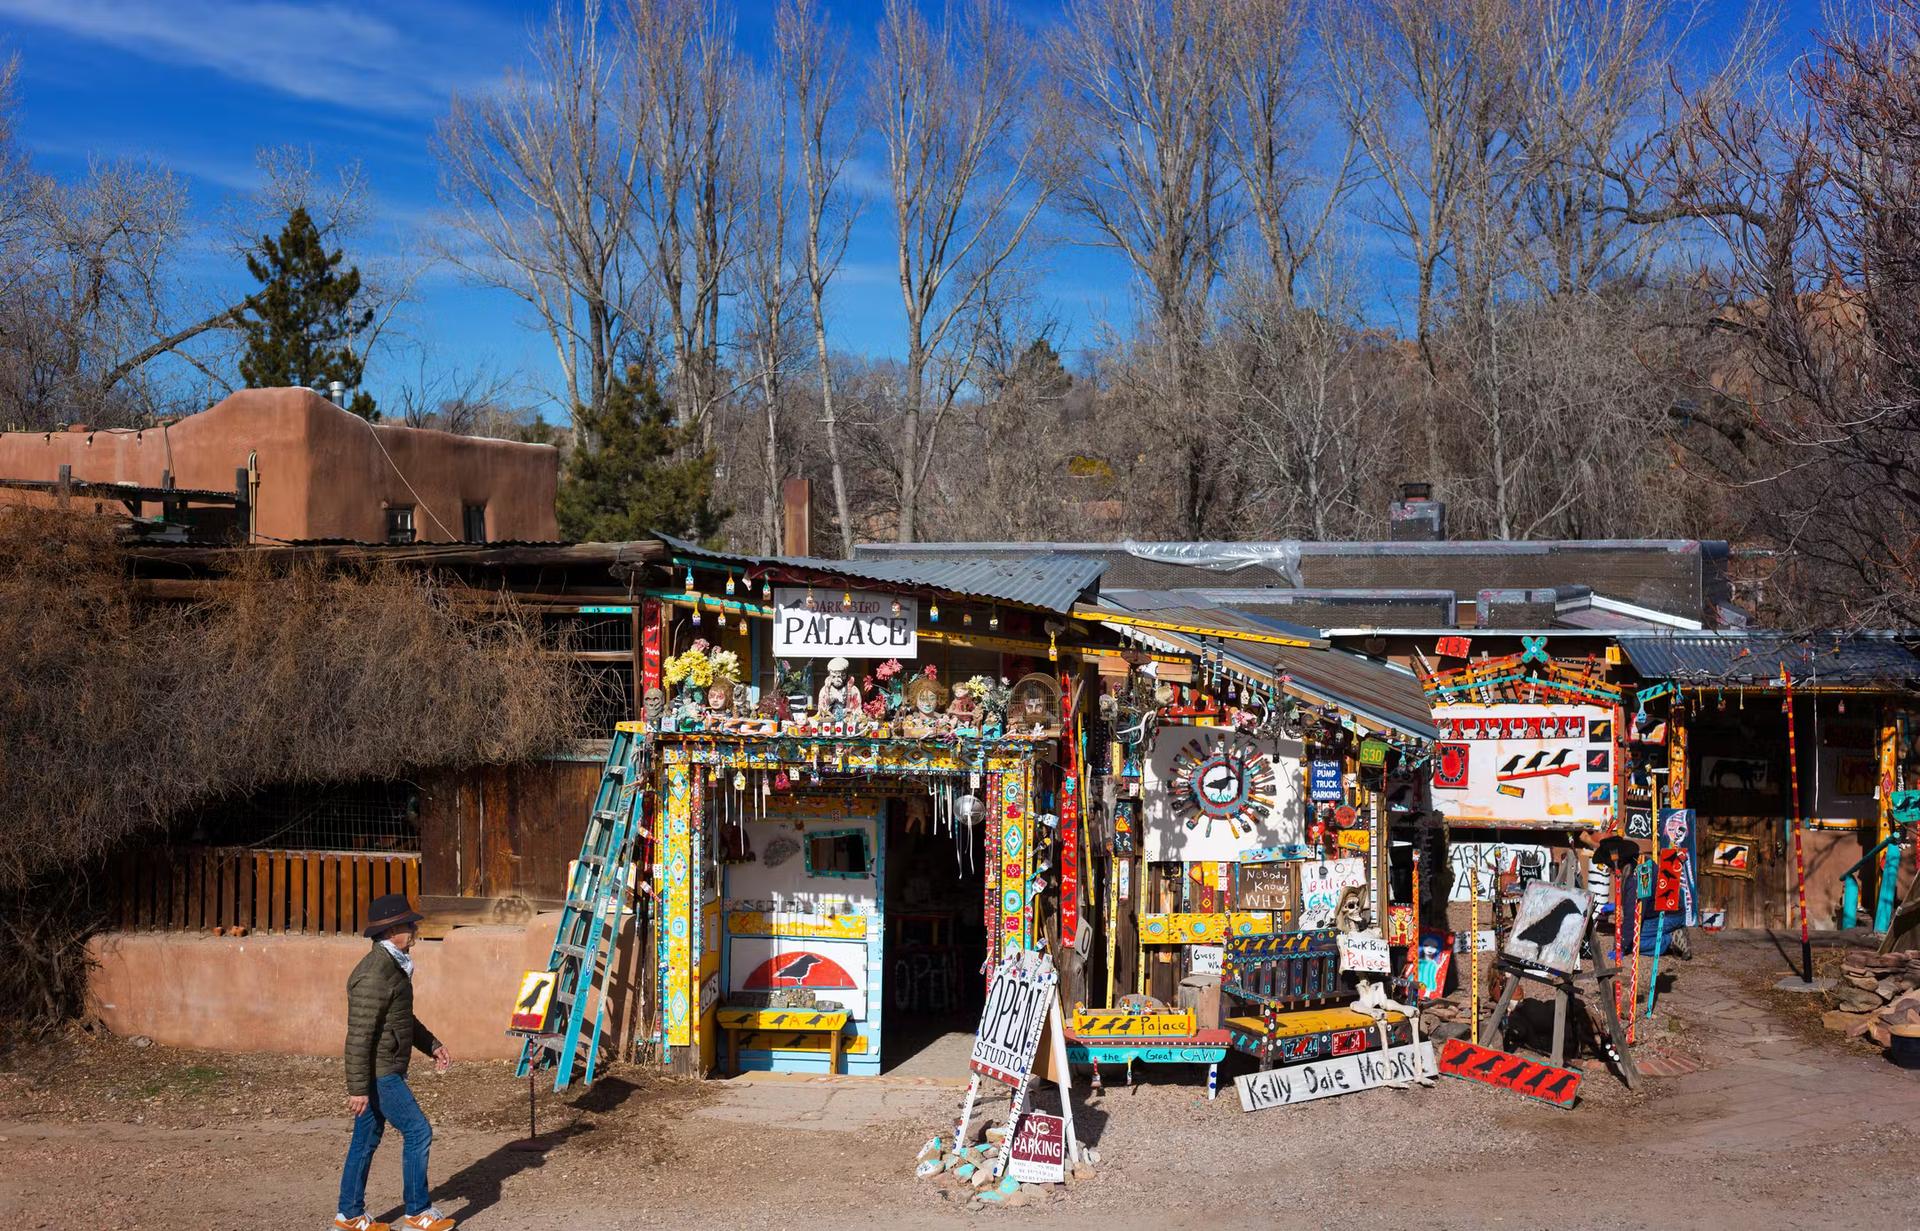 Man Walking Past Art Gallery on Canyon Road in Santa Fe, New Mexico